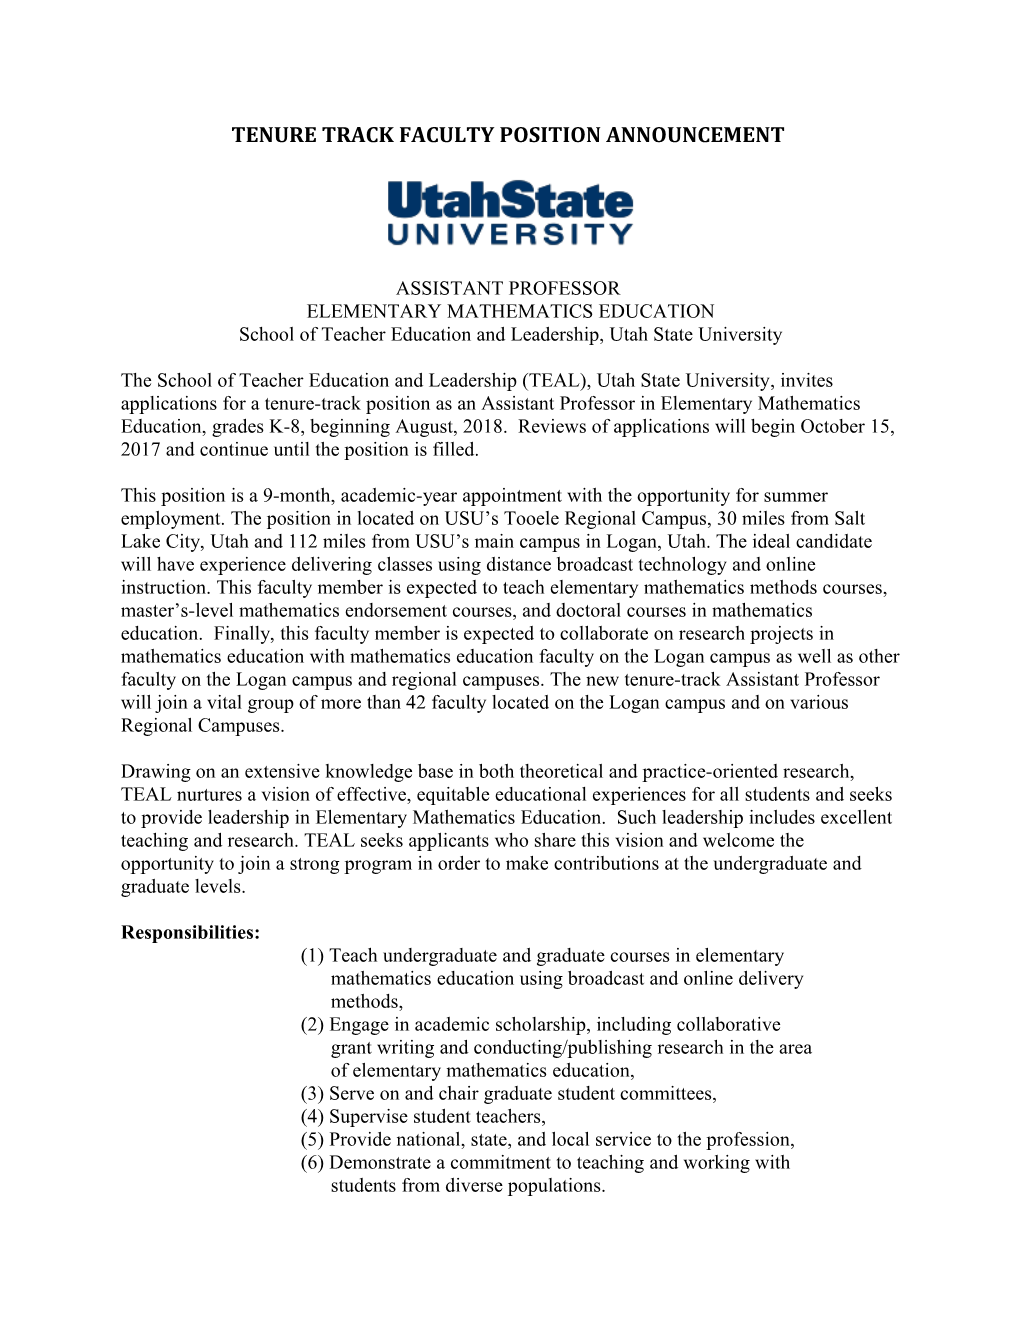 Tenure Track Faculty Position Announcement